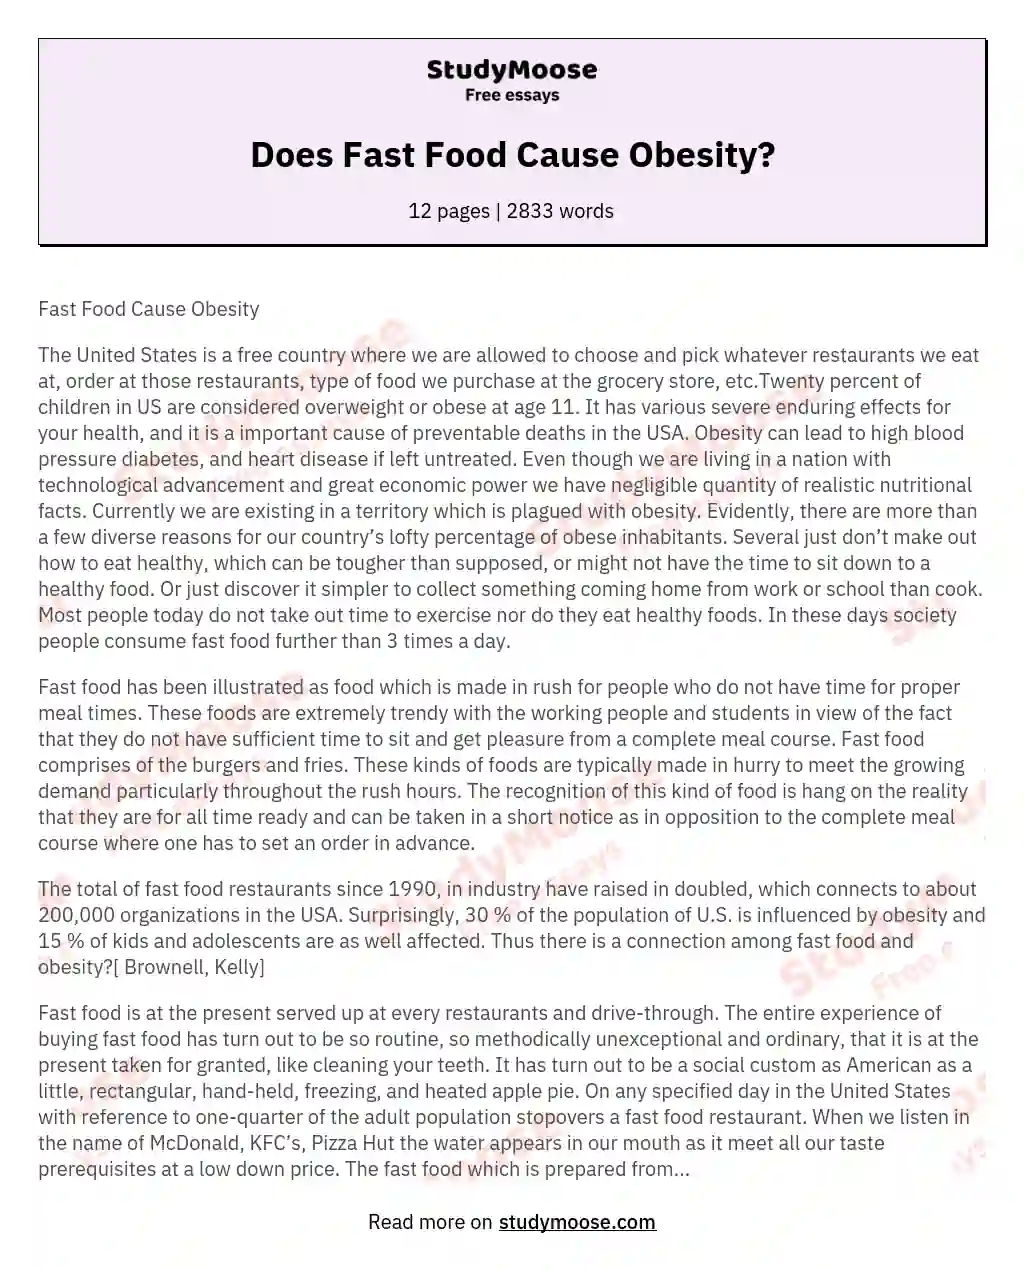 how fast food causes obesity